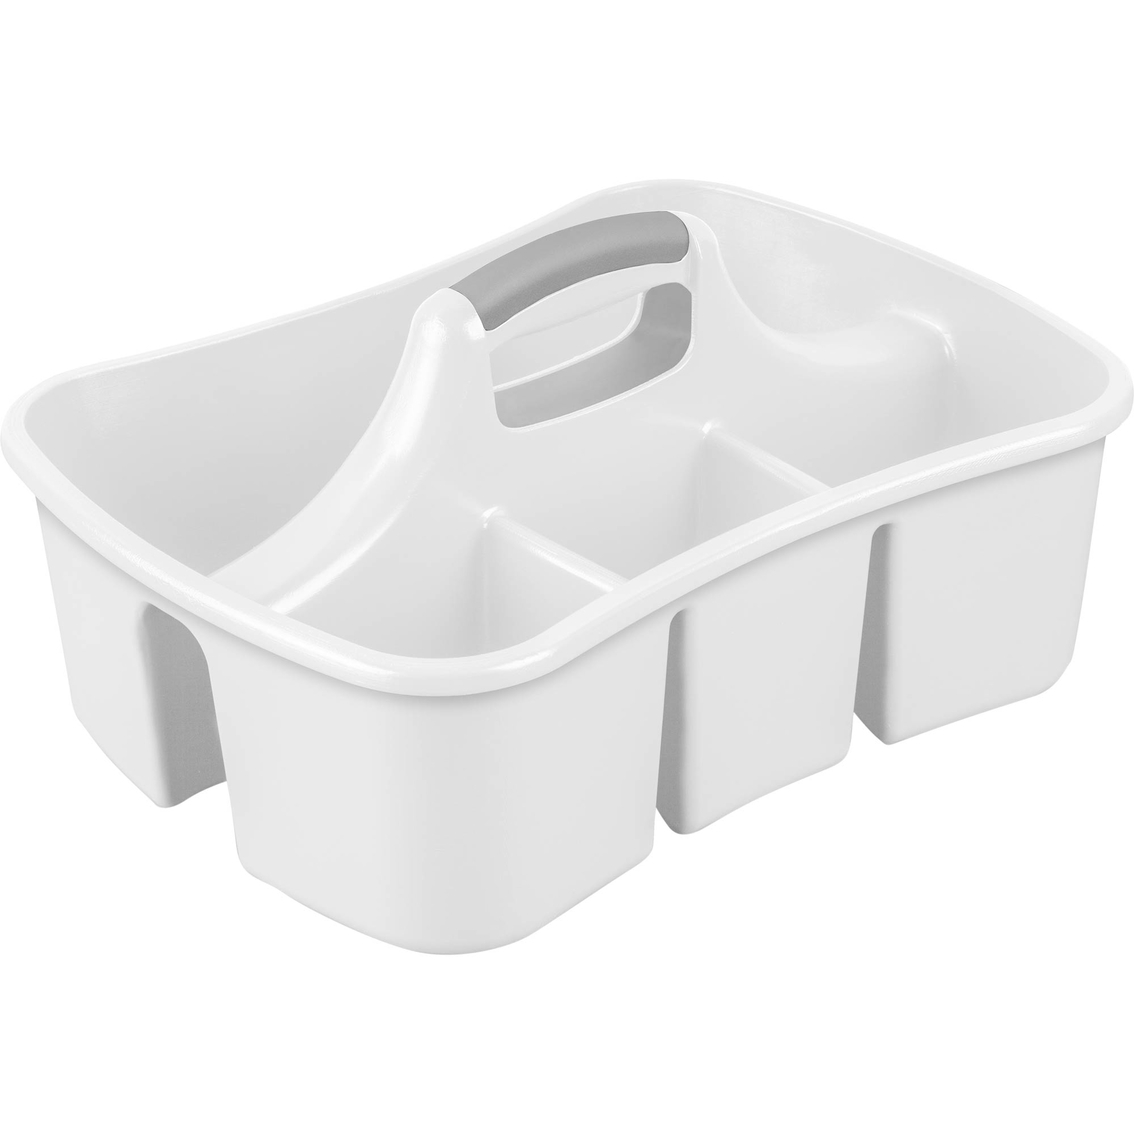 Sterilite White Divided Storage Ultra Caddy with 4 Compartments and Handles  (24 -Pack) 24 x 15888006 - The Home Depot